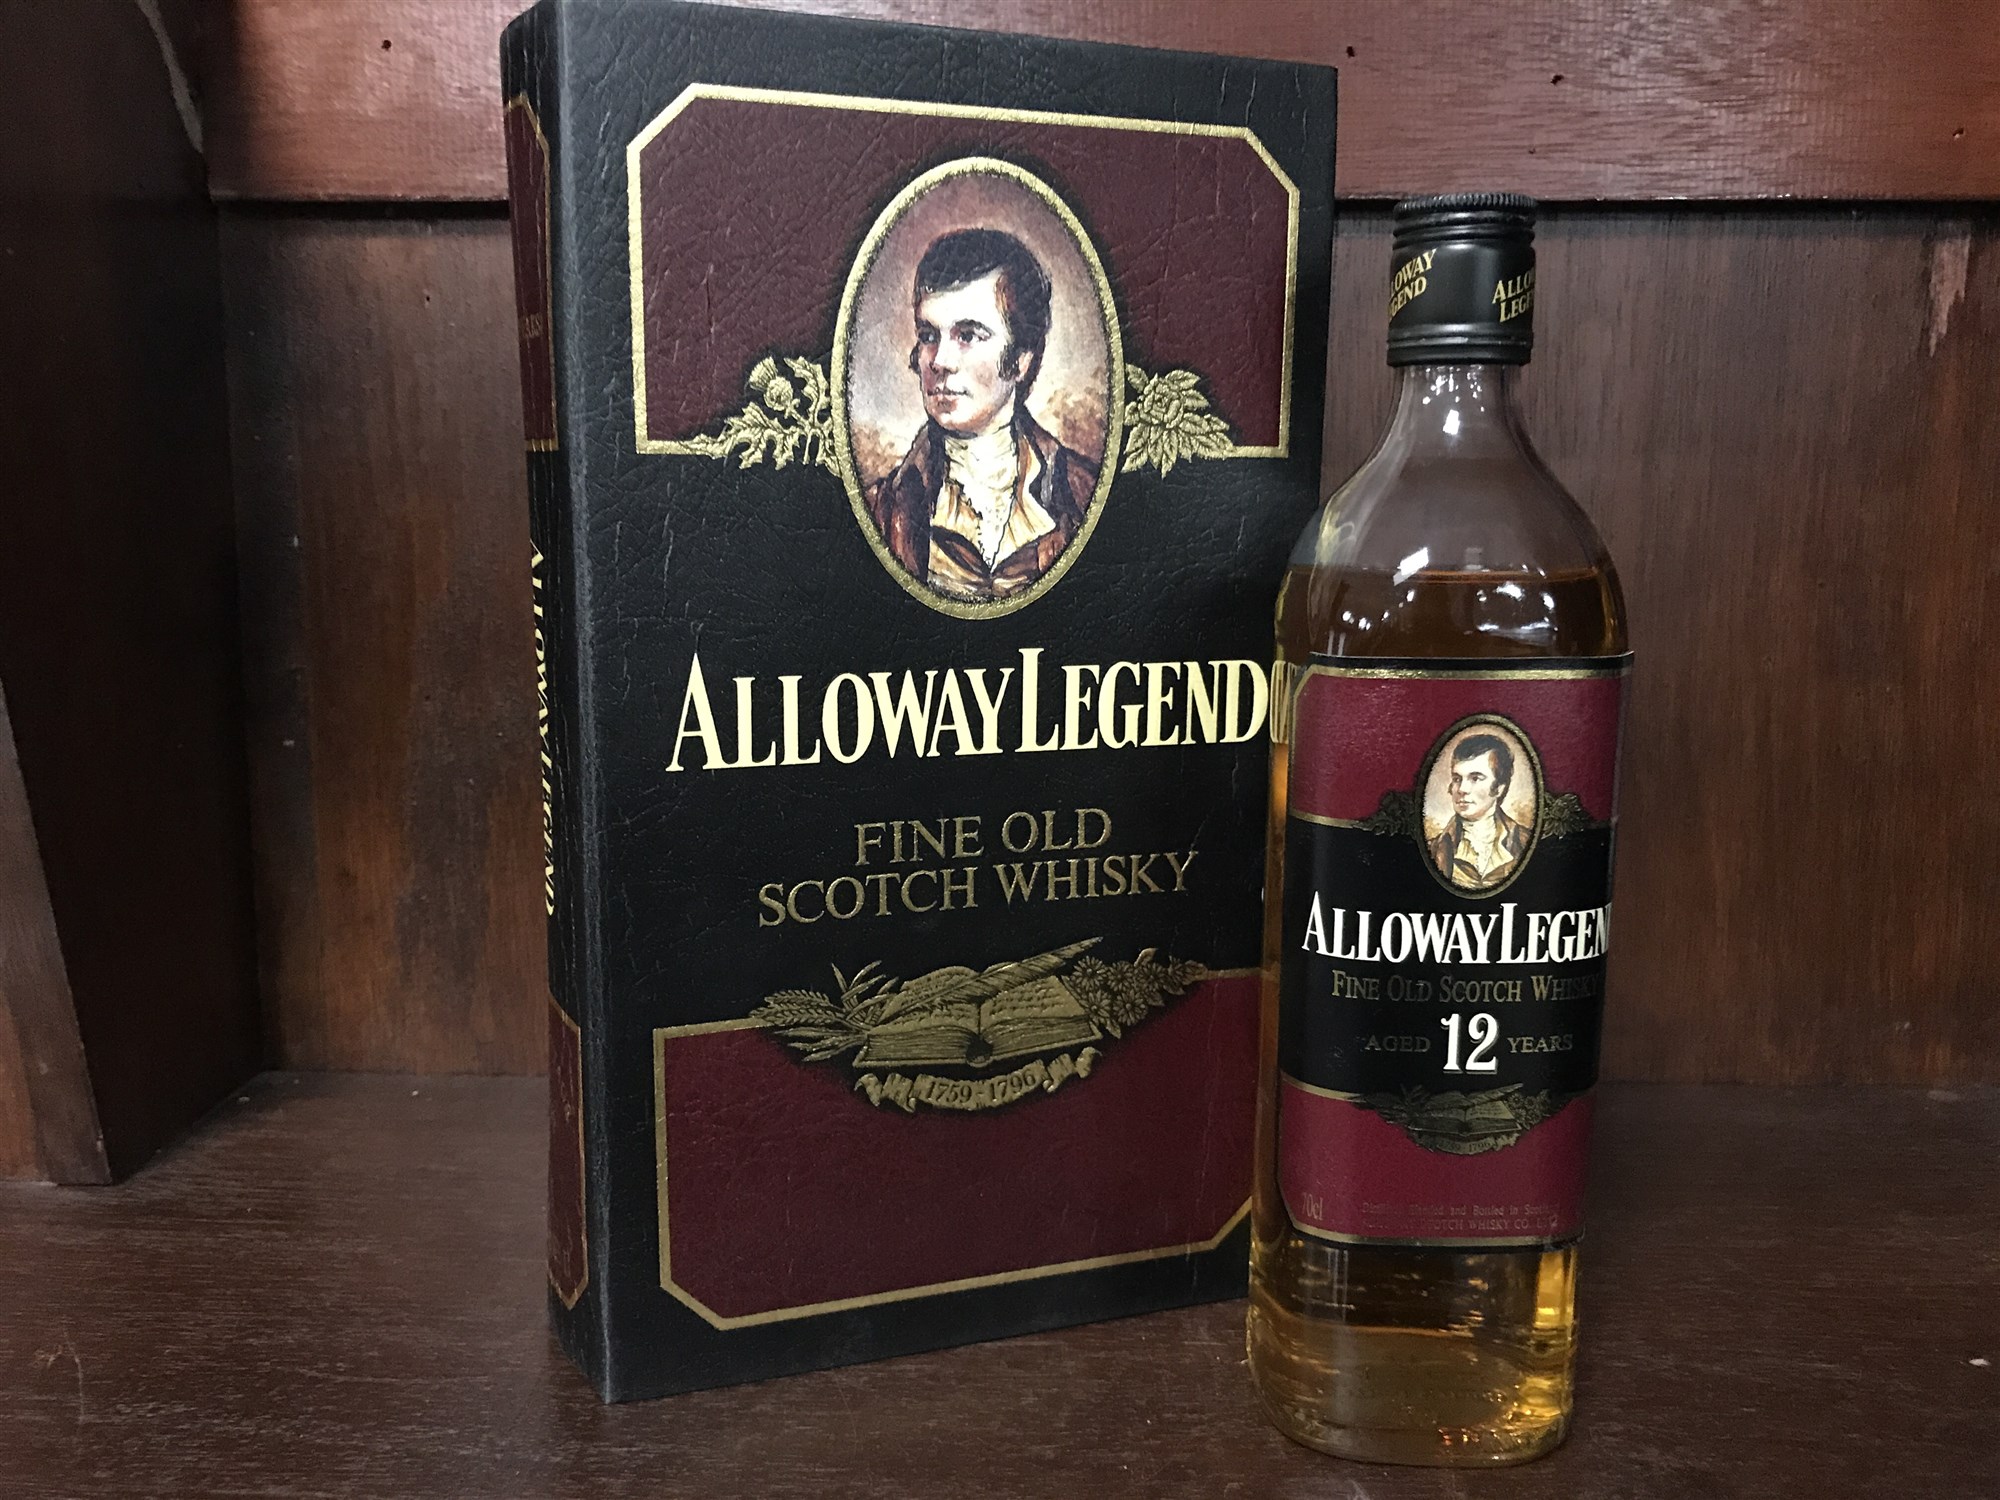 ALLOWAY LEGEND AGED 12 YEARS